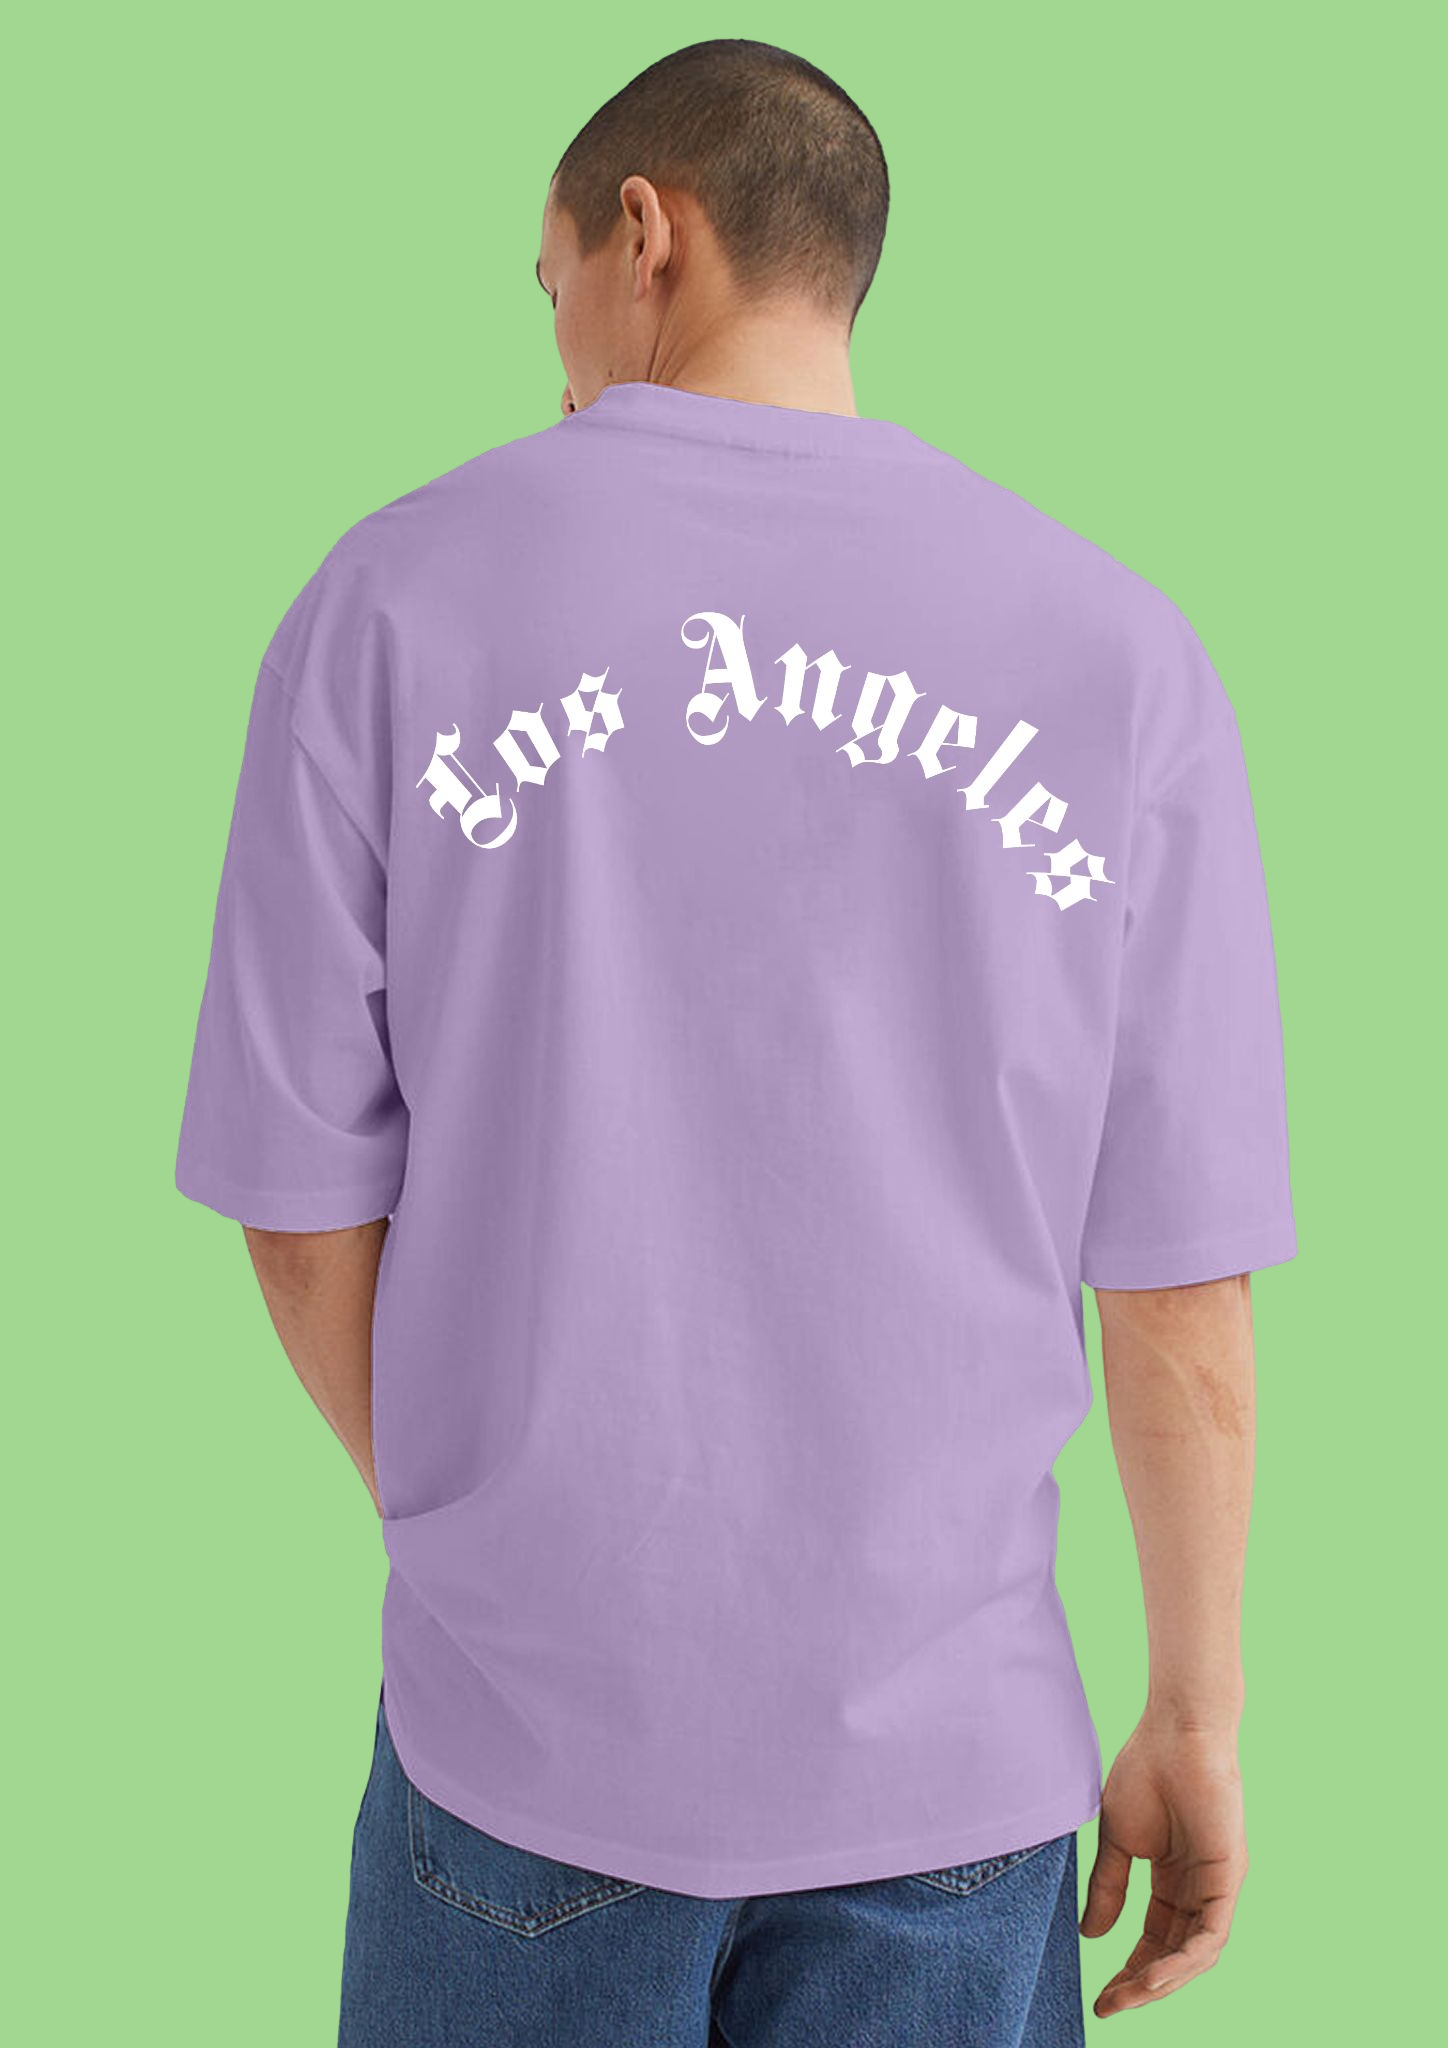 Los Angeles Lavender Drop-Shoulder Oversized Tee: Experience Comfort and Style with Bwolves